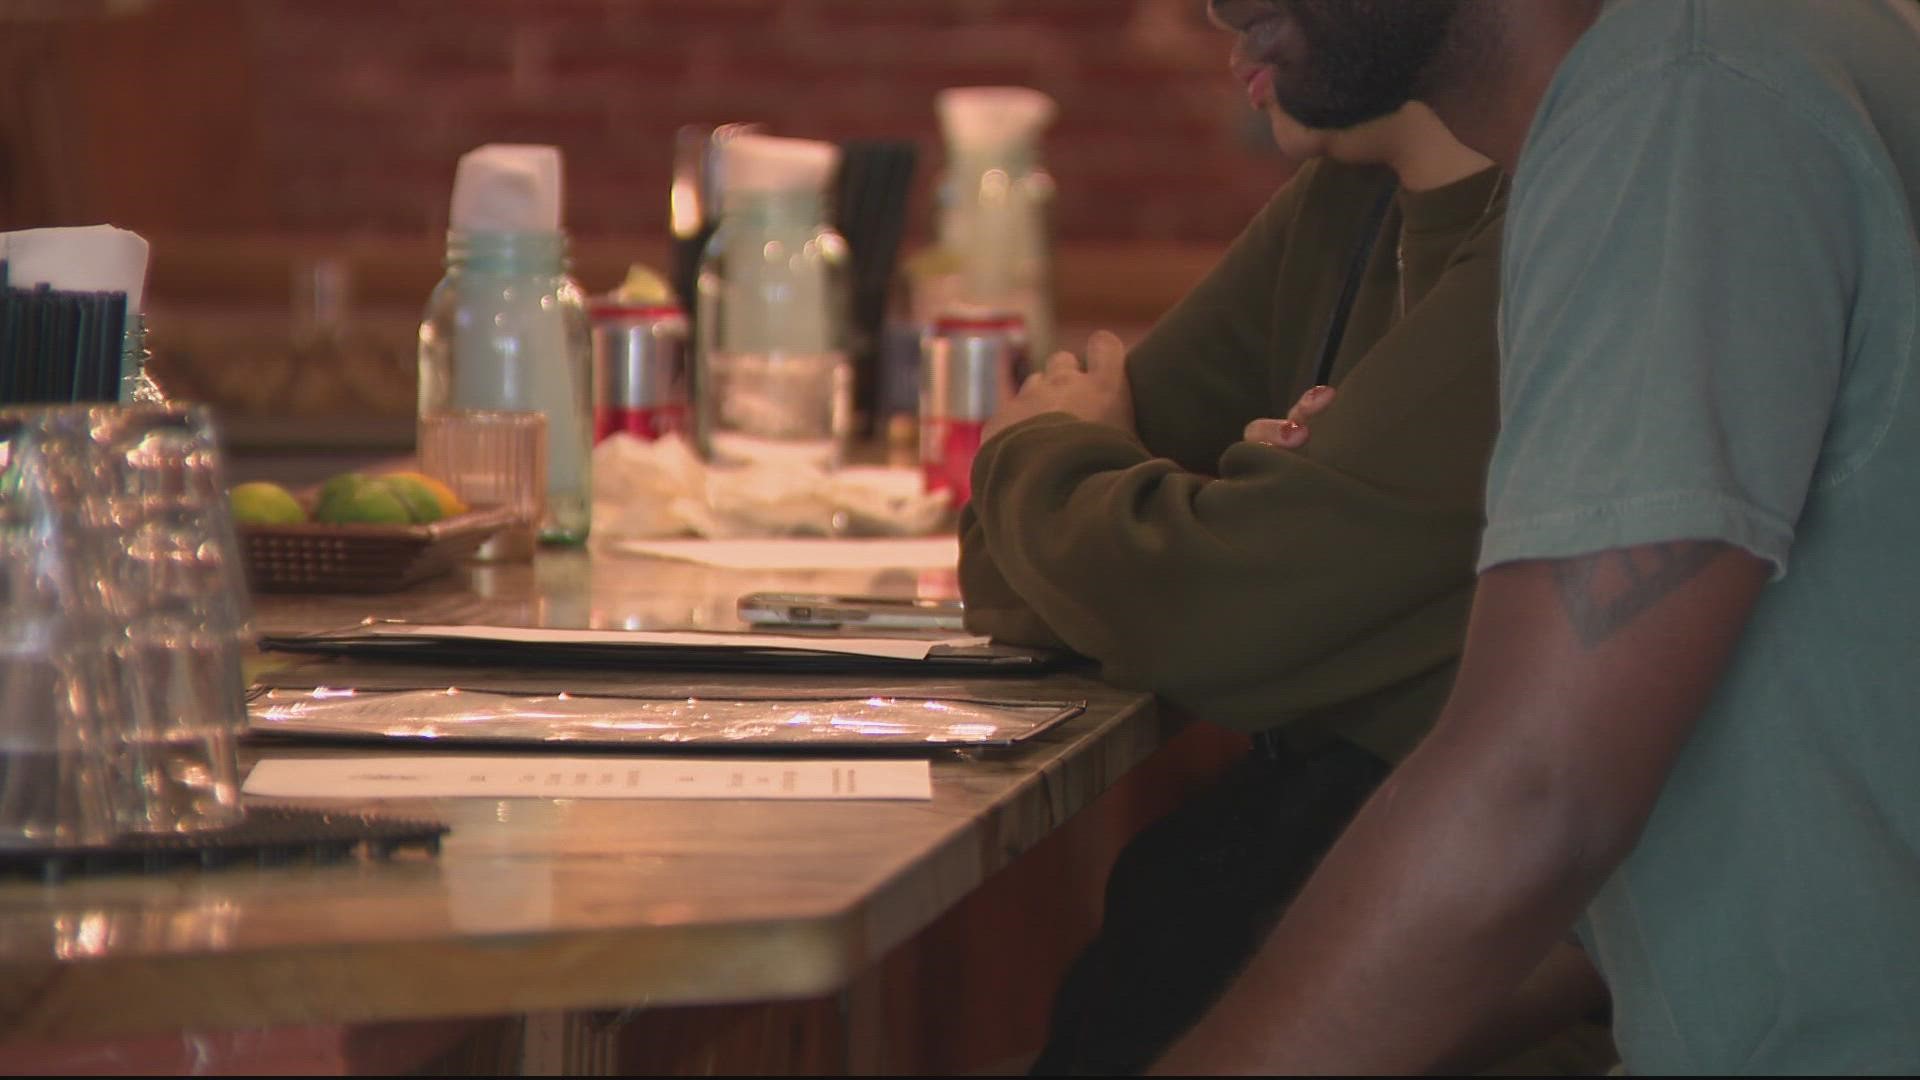 Police said increments of $25,000 were taken out of the Adams Morgan restaurant's account.